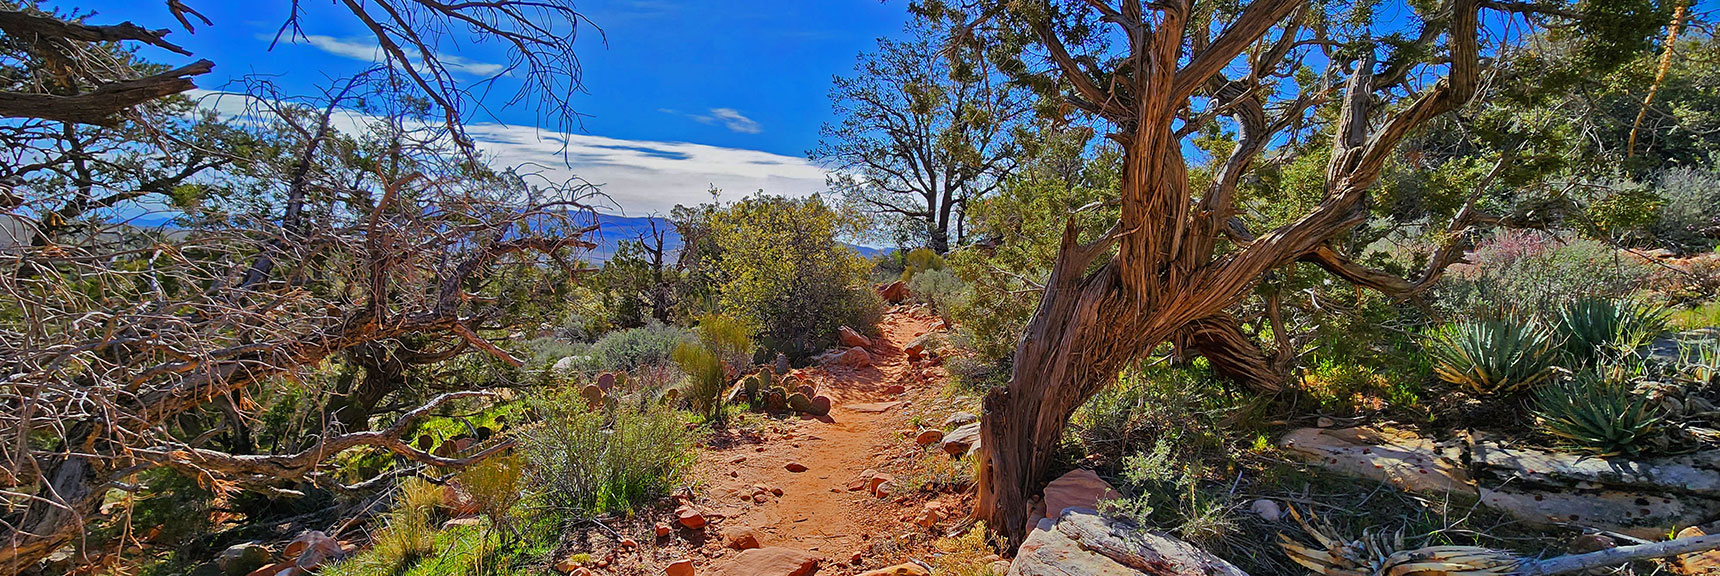 Looking Back While Descending into Pine Creek Canyon on Knoll Trail | Knoll Trail | Red Rock Canyon National Conservation Area, Nevada | David Smith | LasVegasAreaTrails.com